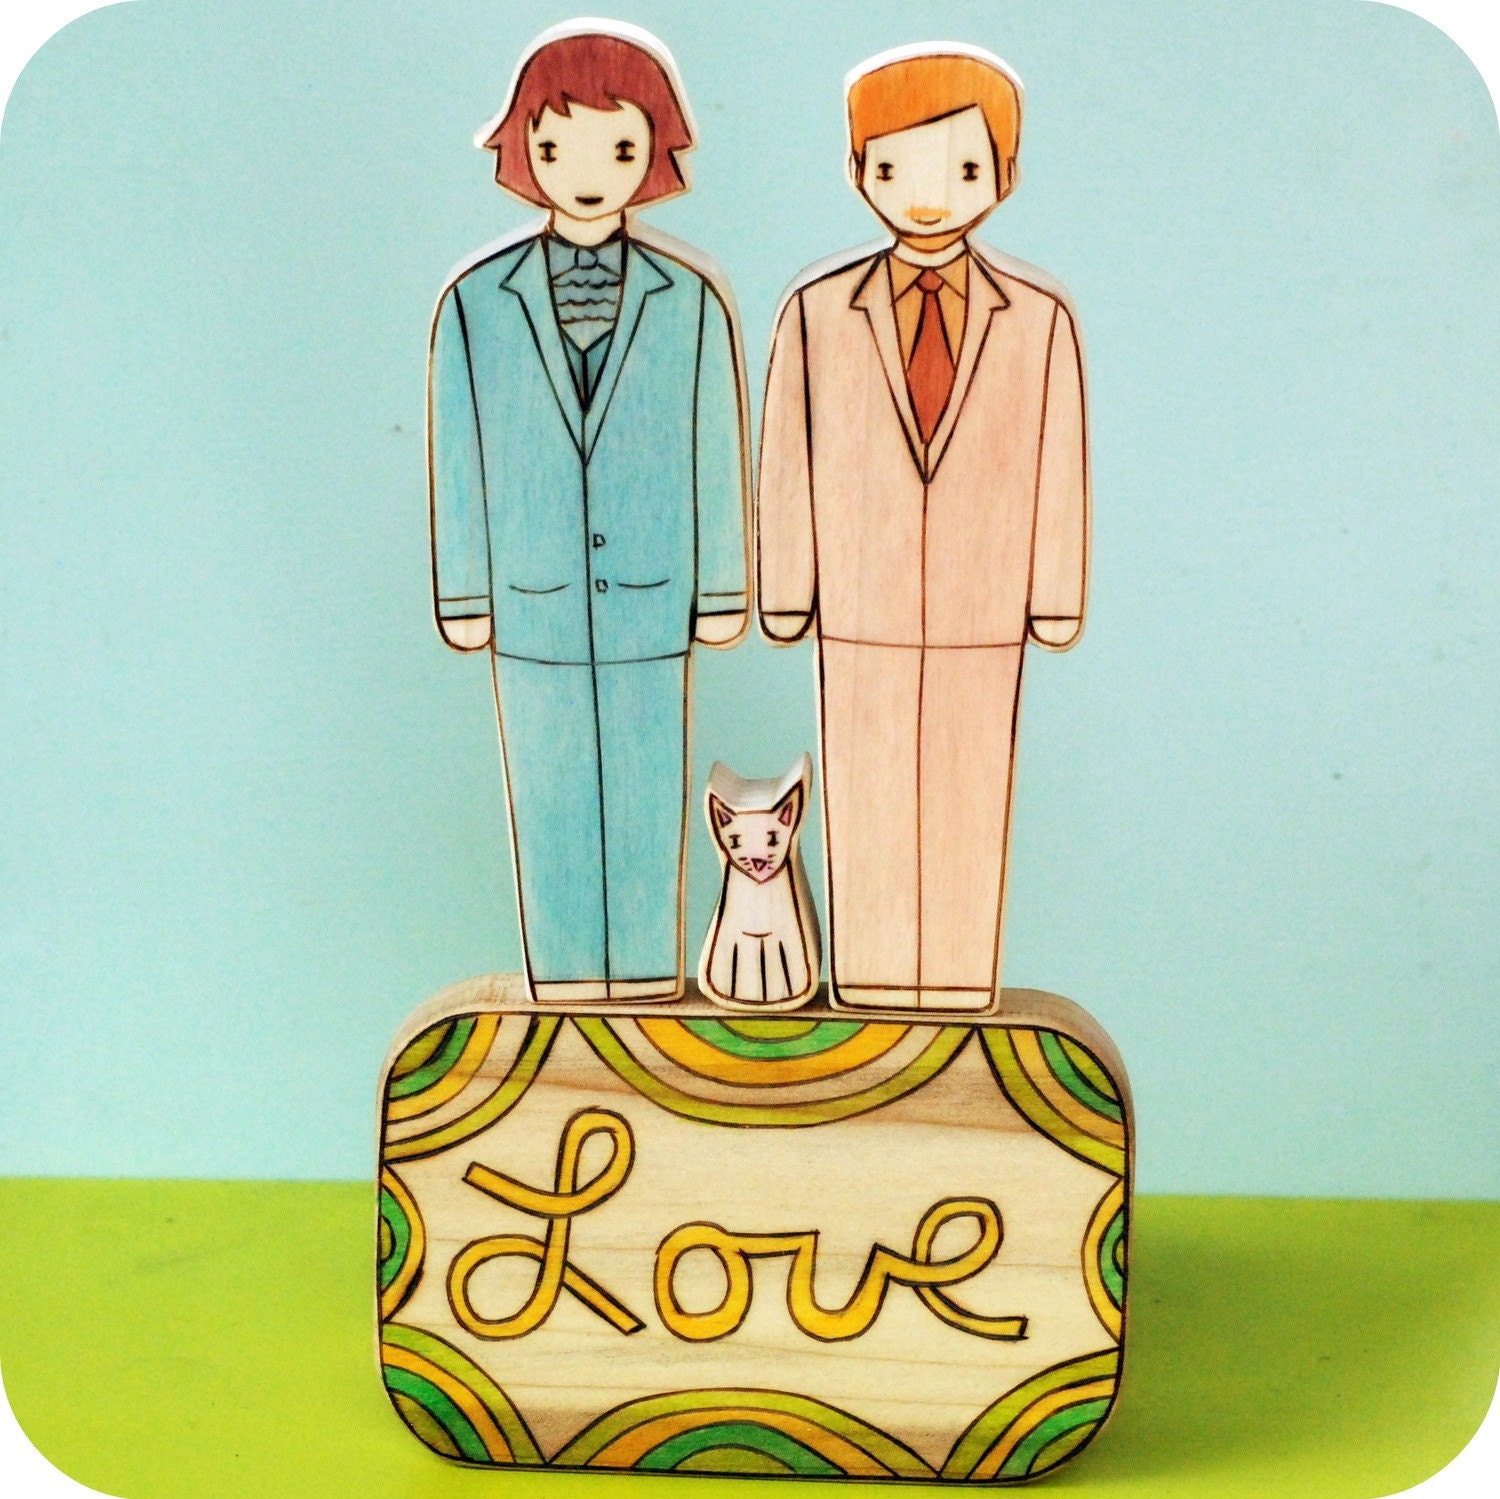 Cats Wedding Cake Topper